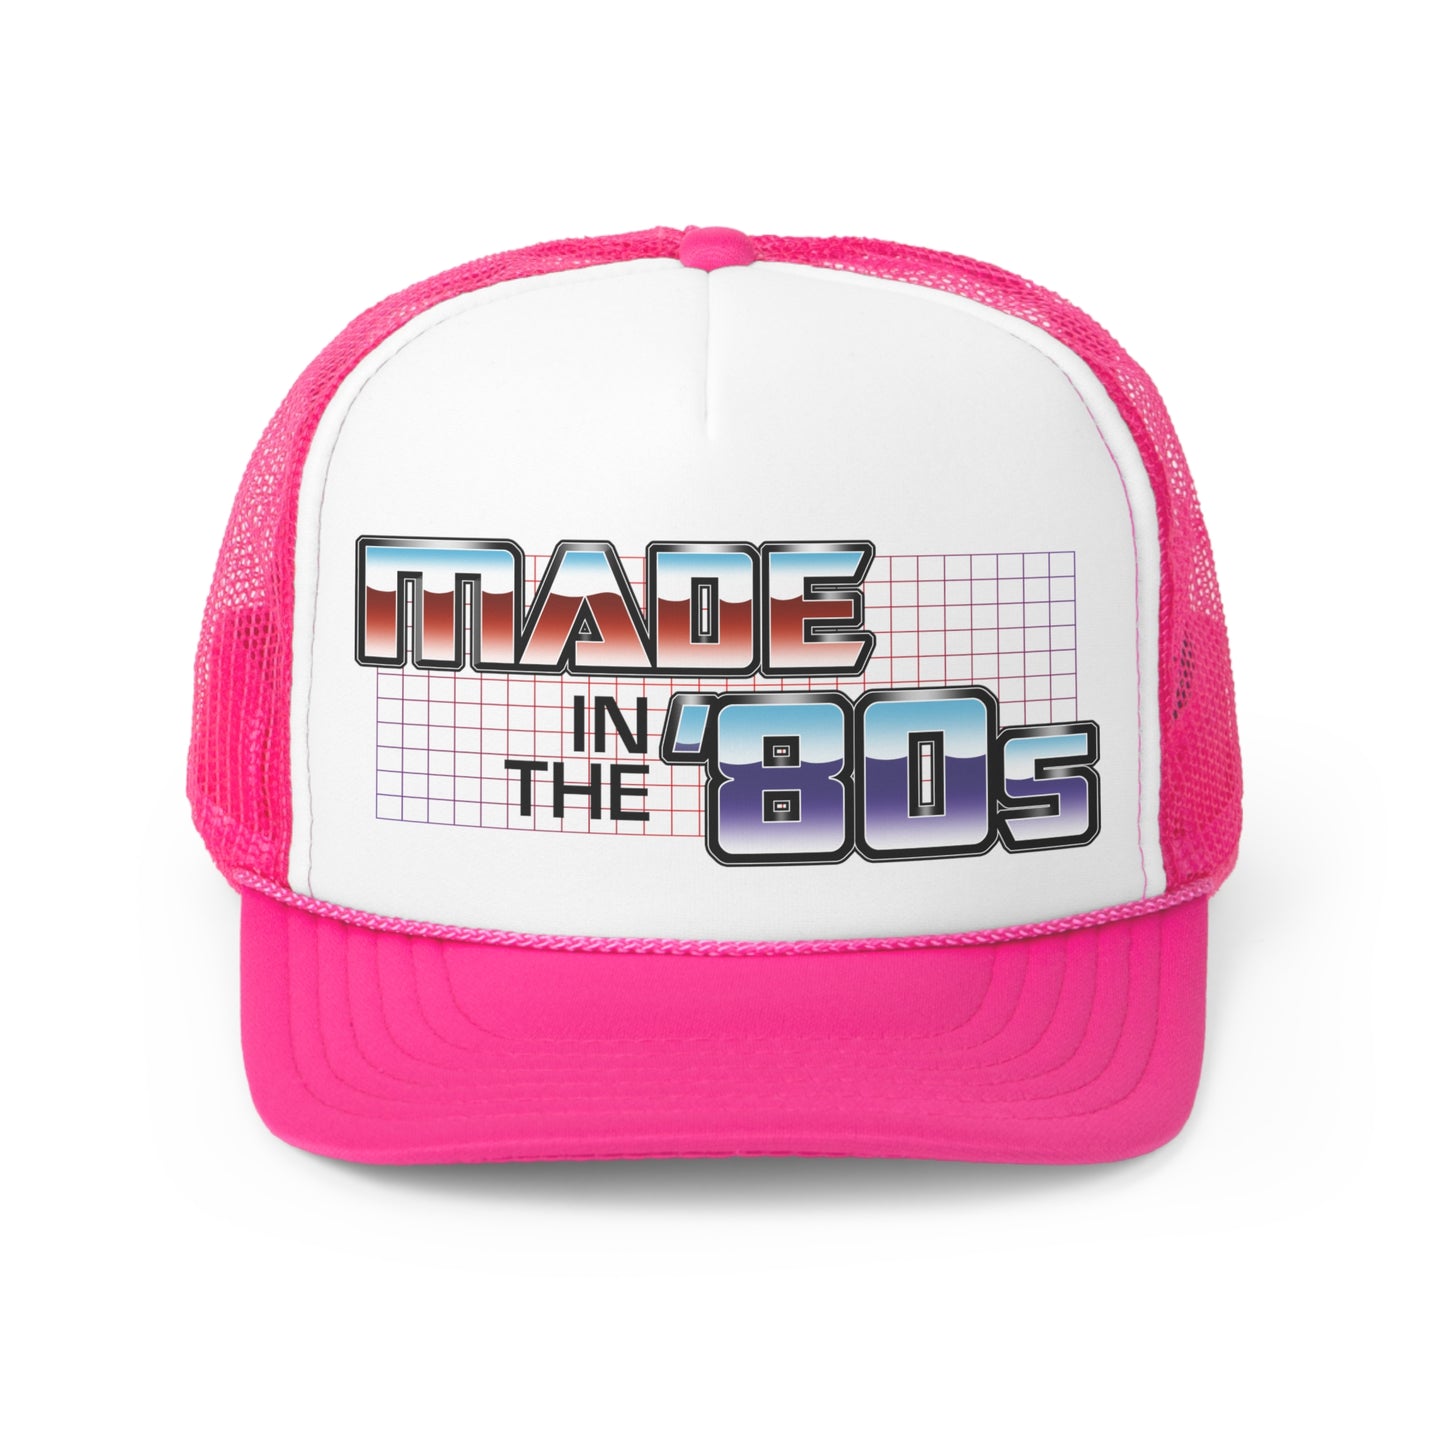 Made in the '80s trucker hat